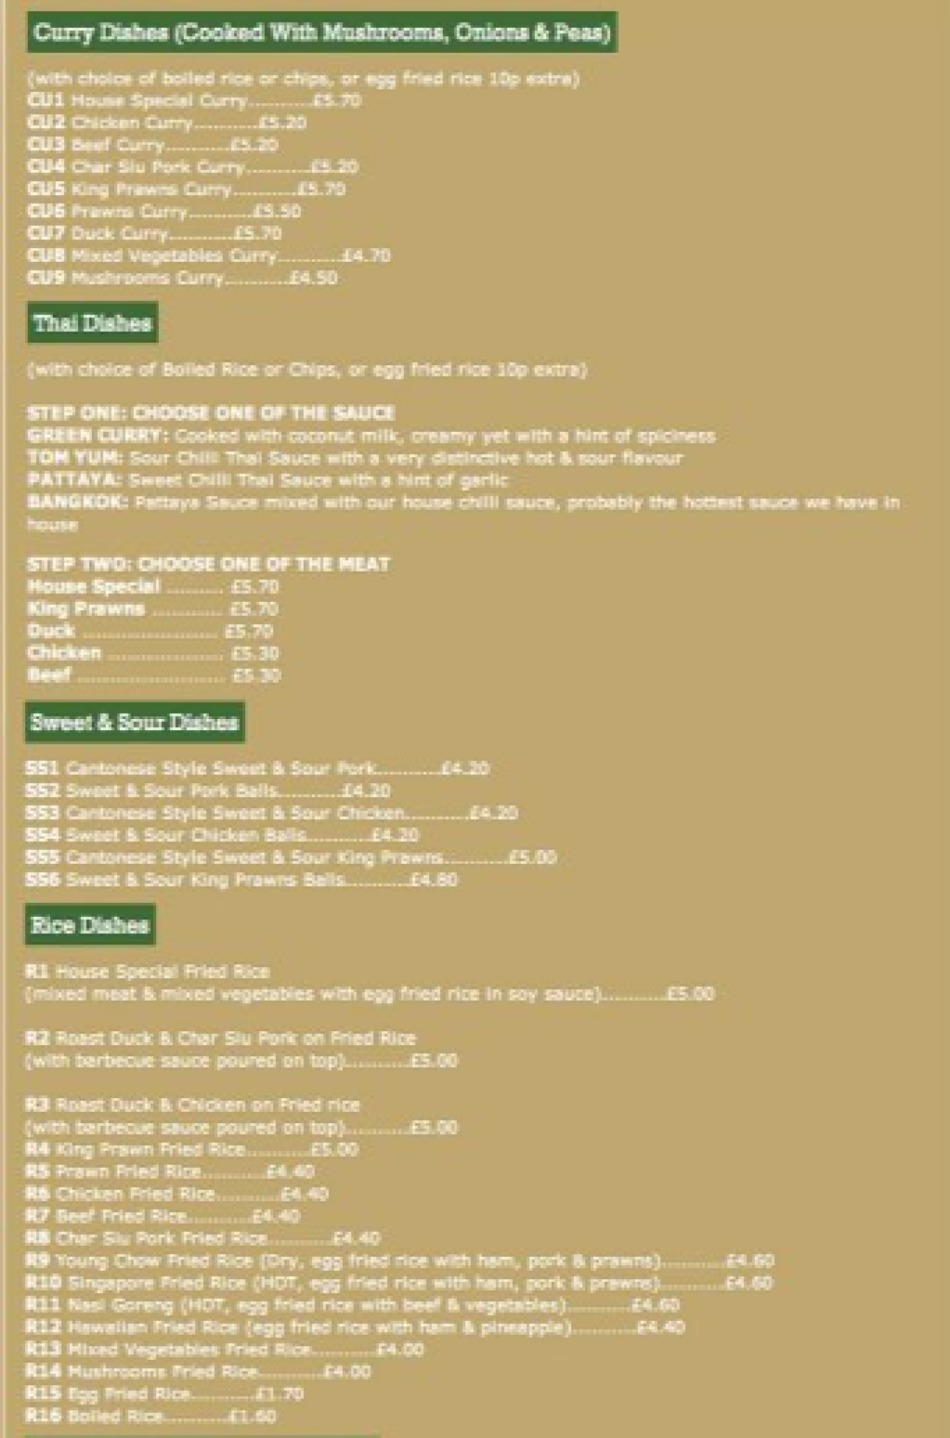 Takeaway Restaurant Menu Page - The Orient Chinese Take Away - Newquay